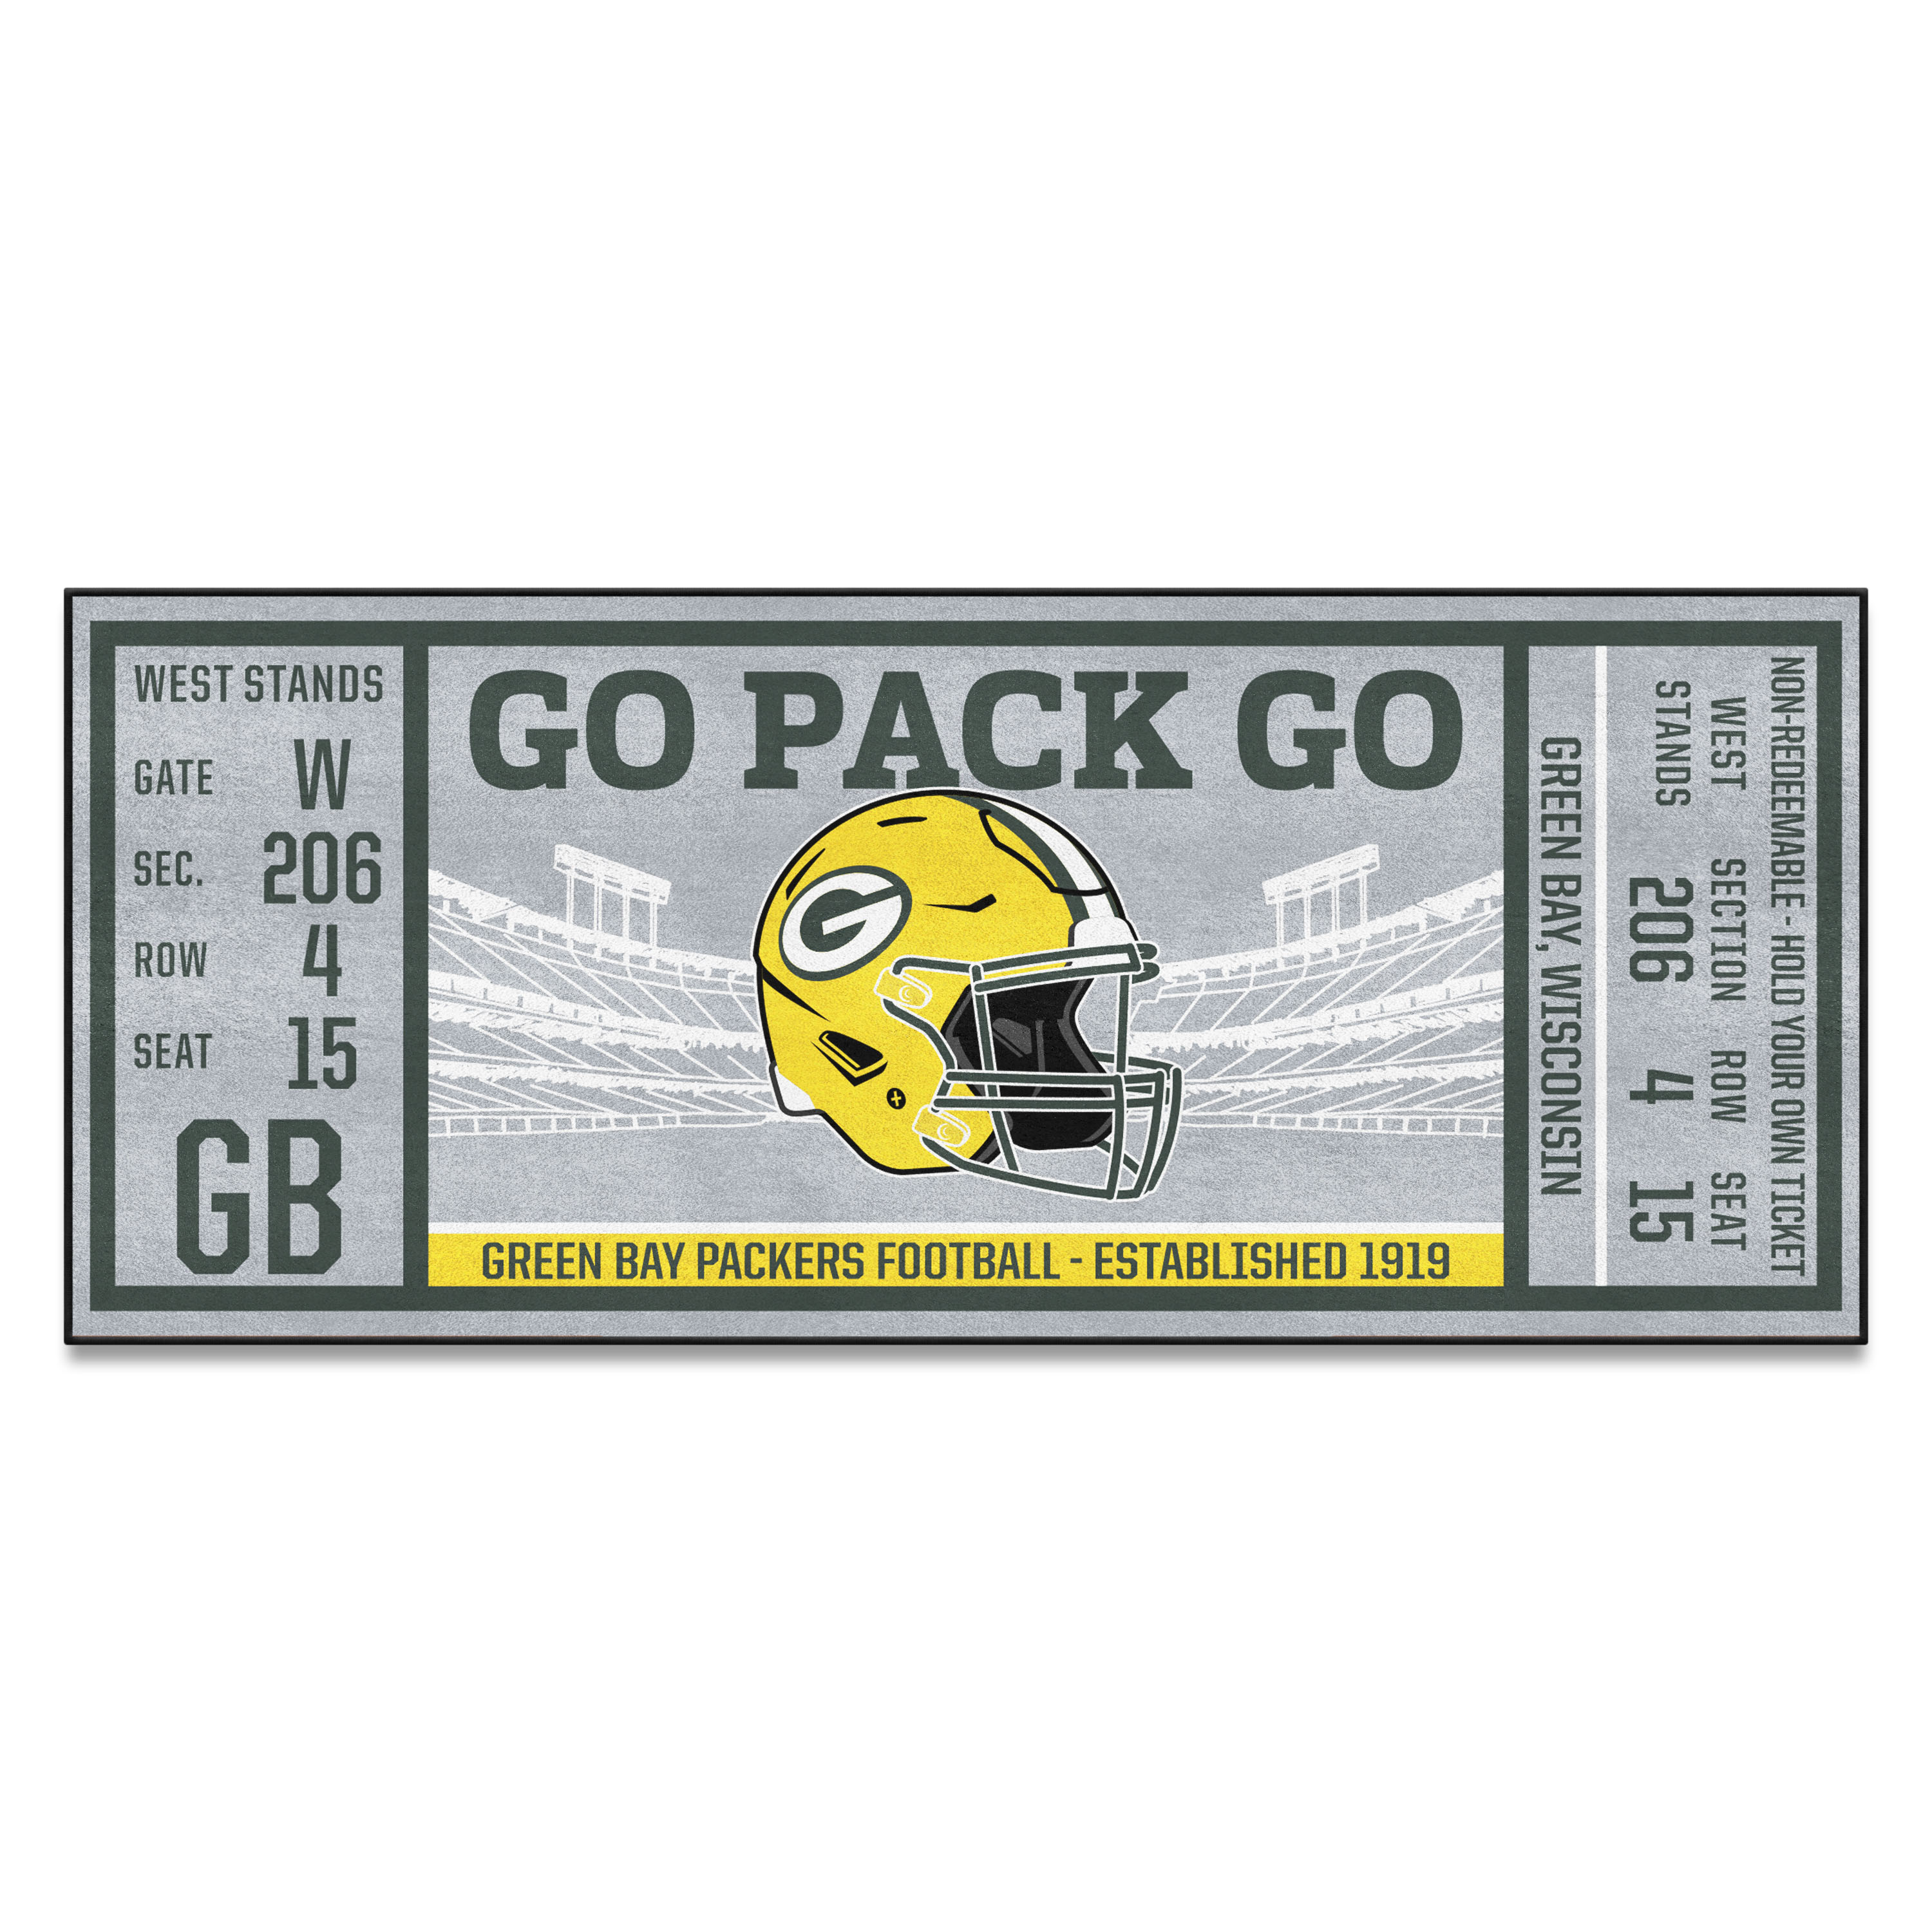 Green Bay Packers Football Tickets for sale